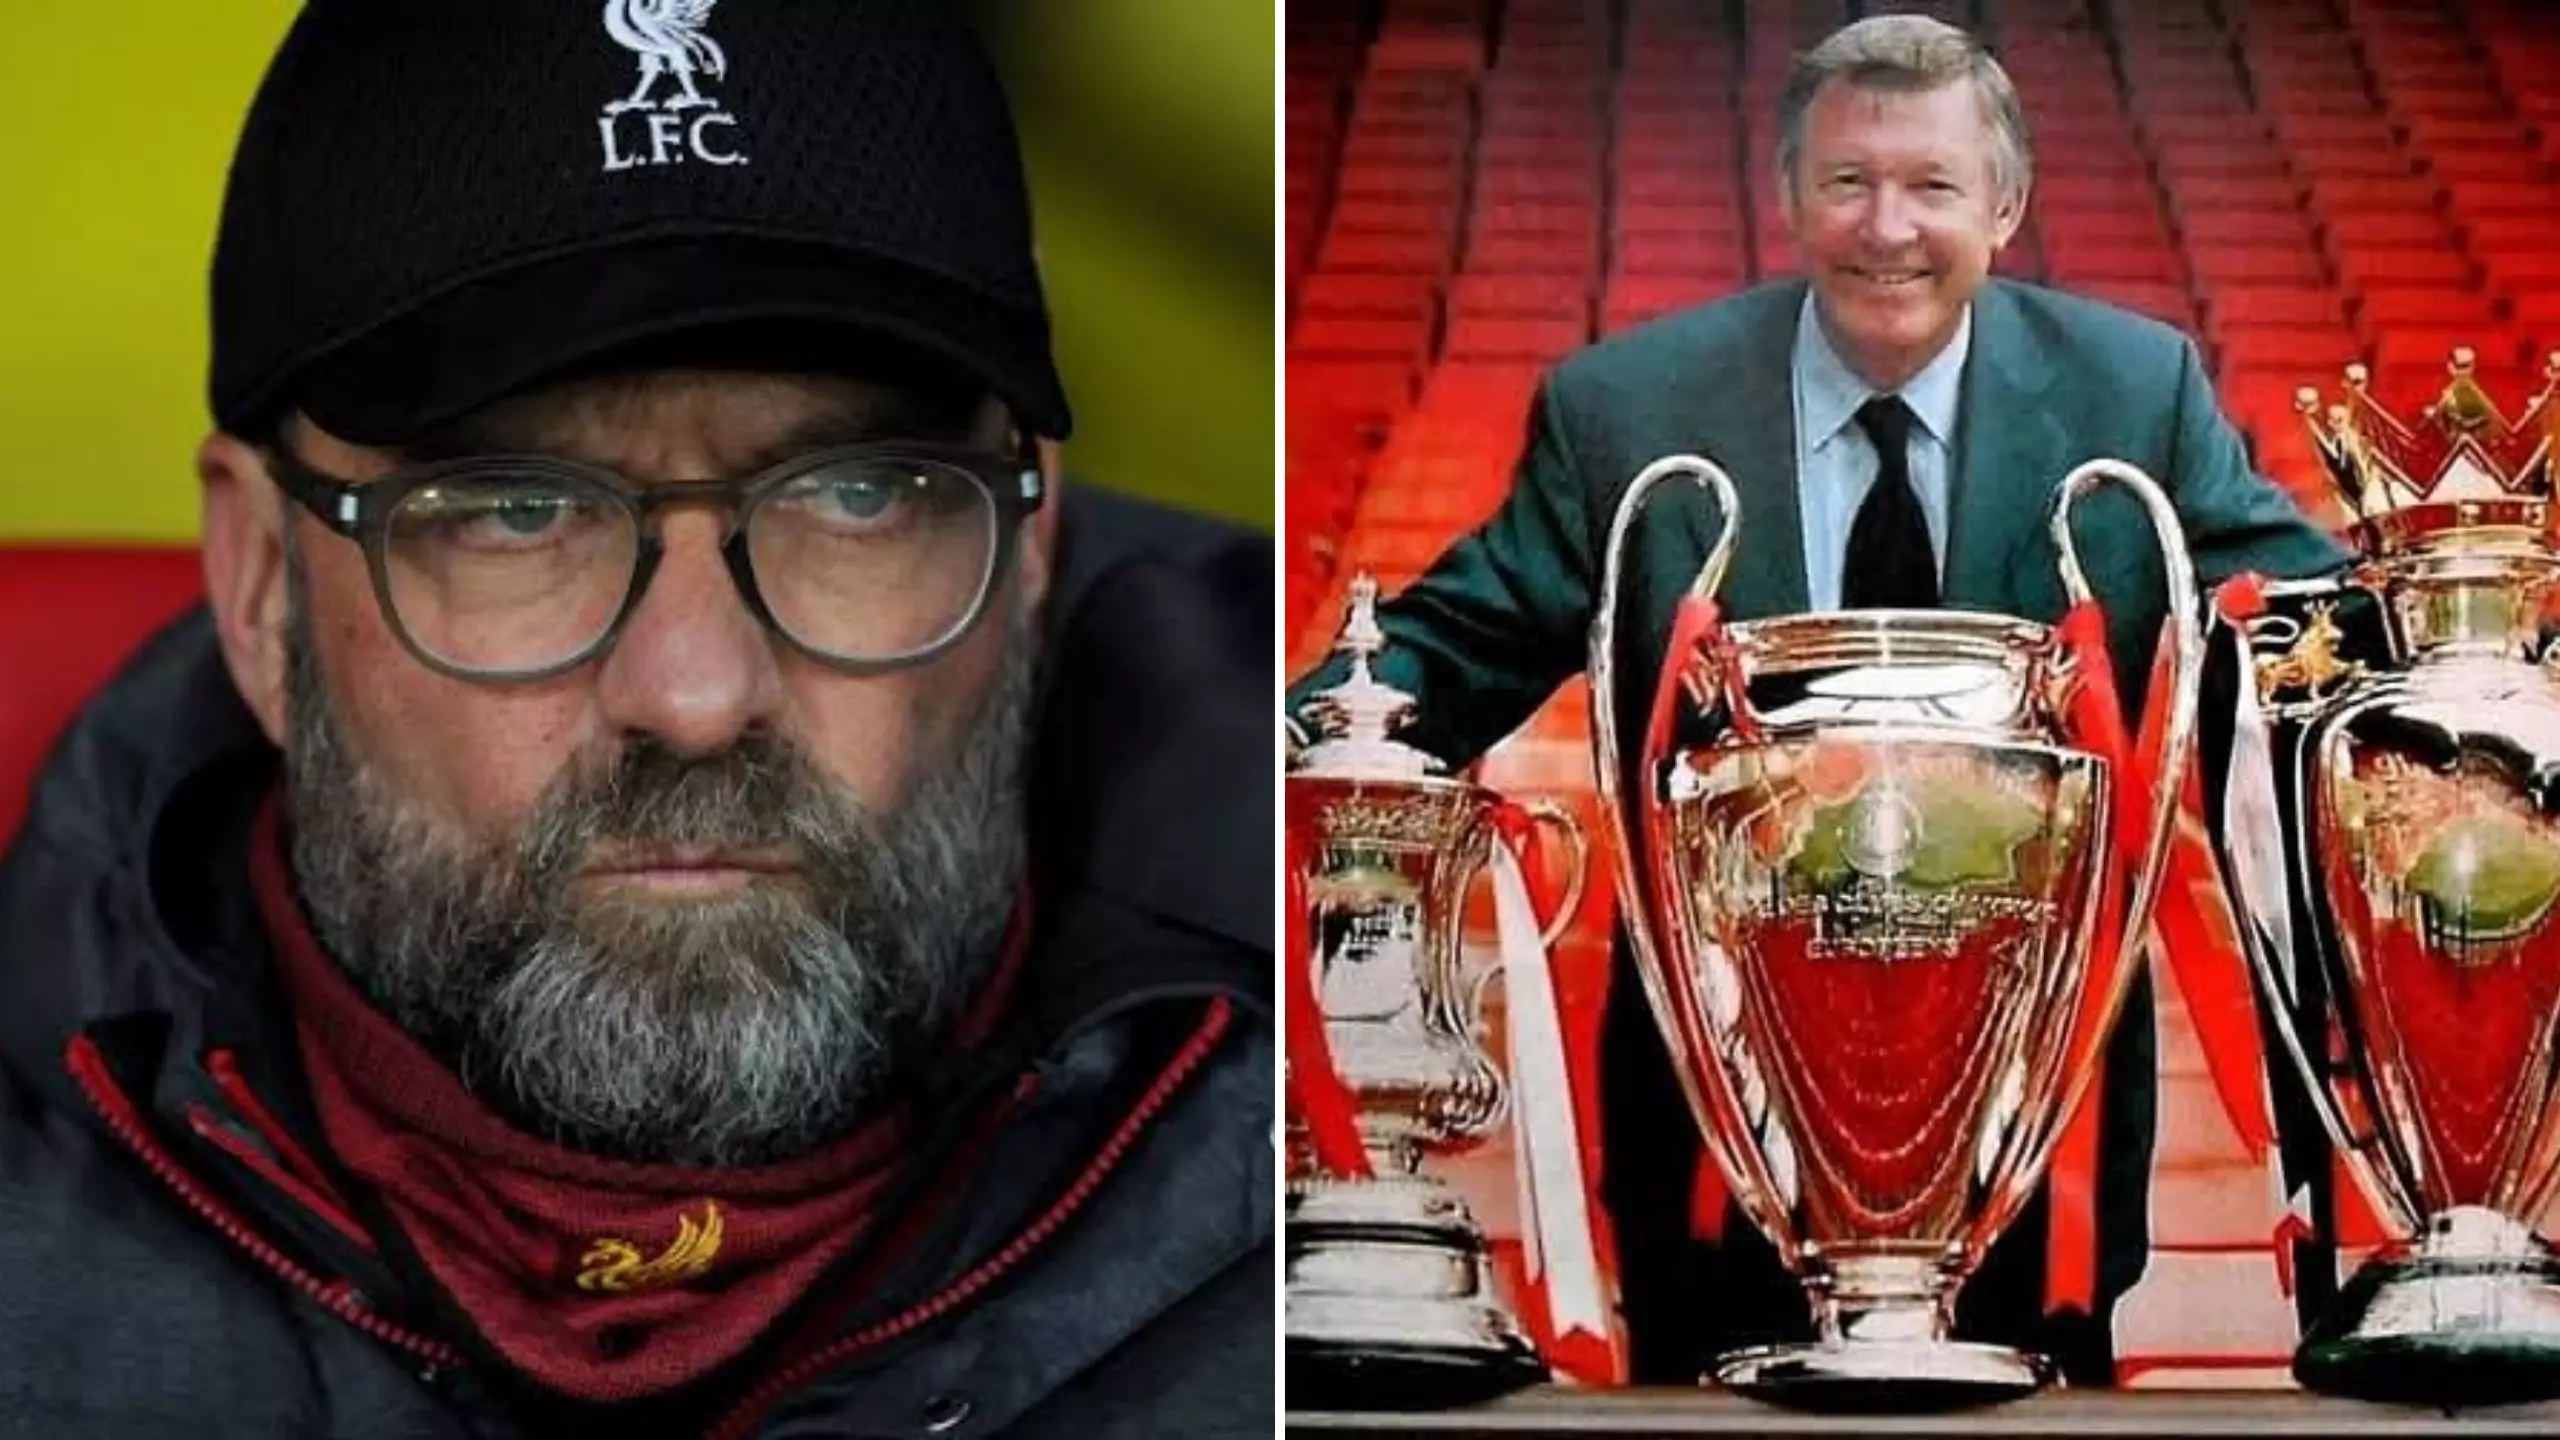 Man Utd Fans Ruthlessly Mock Liverpool Fans For Their Treble Dream Being Over